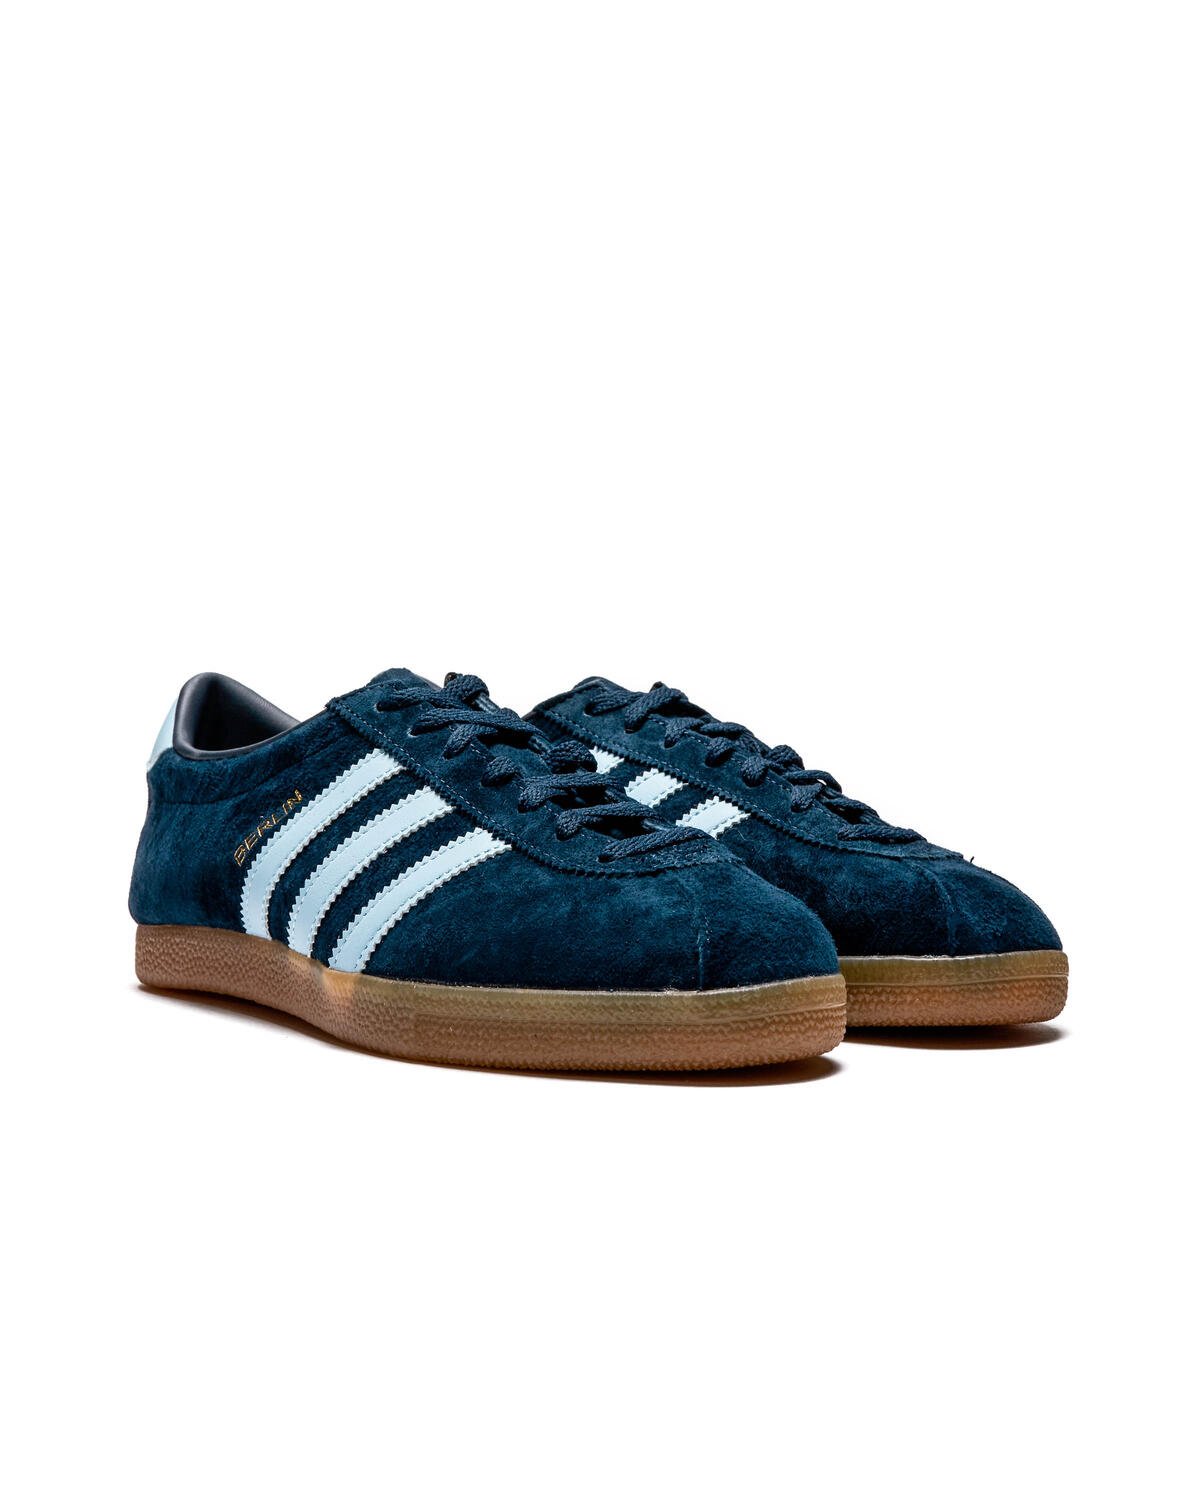 ropa Discreto Trascender adidas Originals BERLIN | adidas bk7404 shoes outlet locations in ohio  store | GY7446 | EllisonbronzeShops STORE